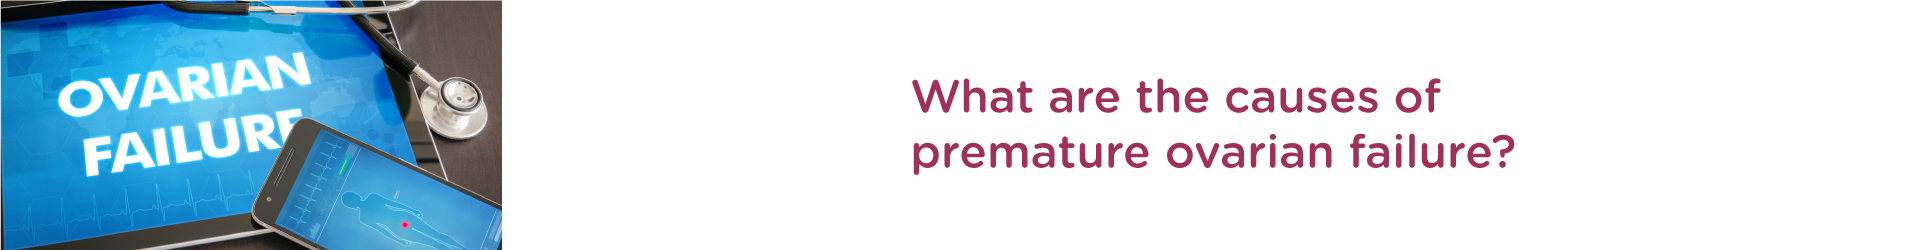 What are the causes of premature ovarian failure?